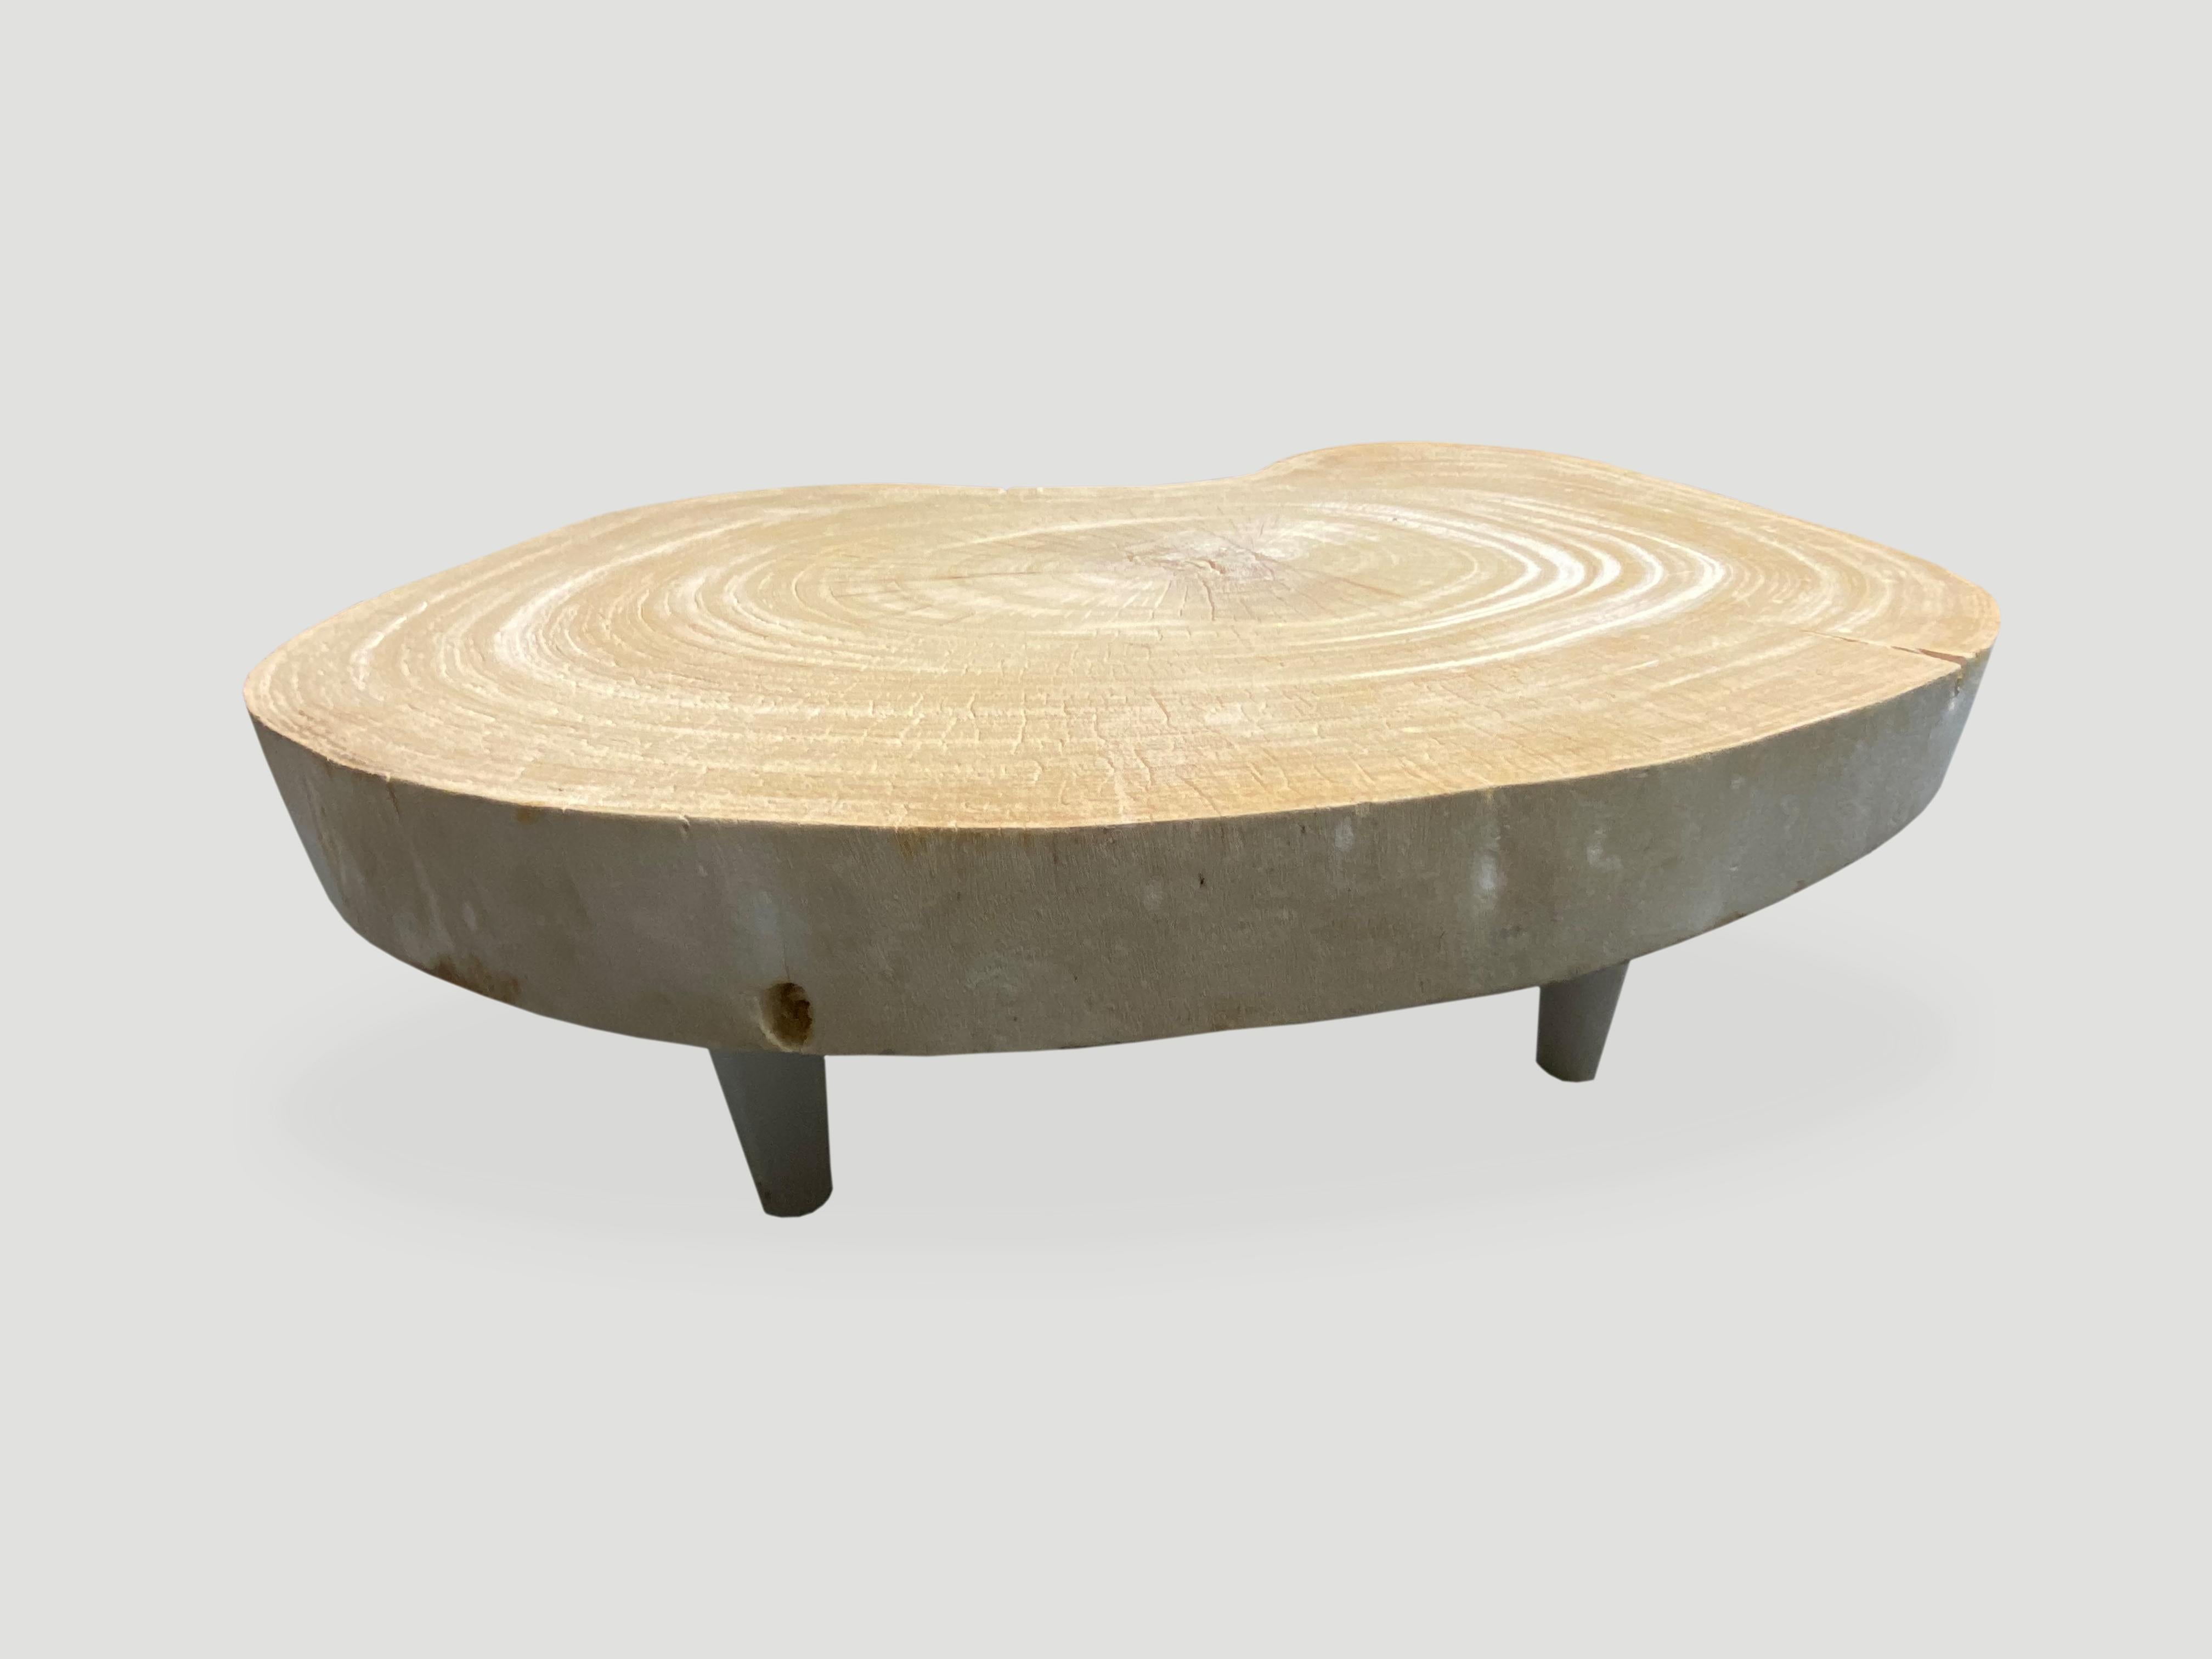 Andrianna Shamaris Amorphous Single Slab Teak Mid-Century Modern Coffee Table In Excellent Condition For Sale In New York, NY